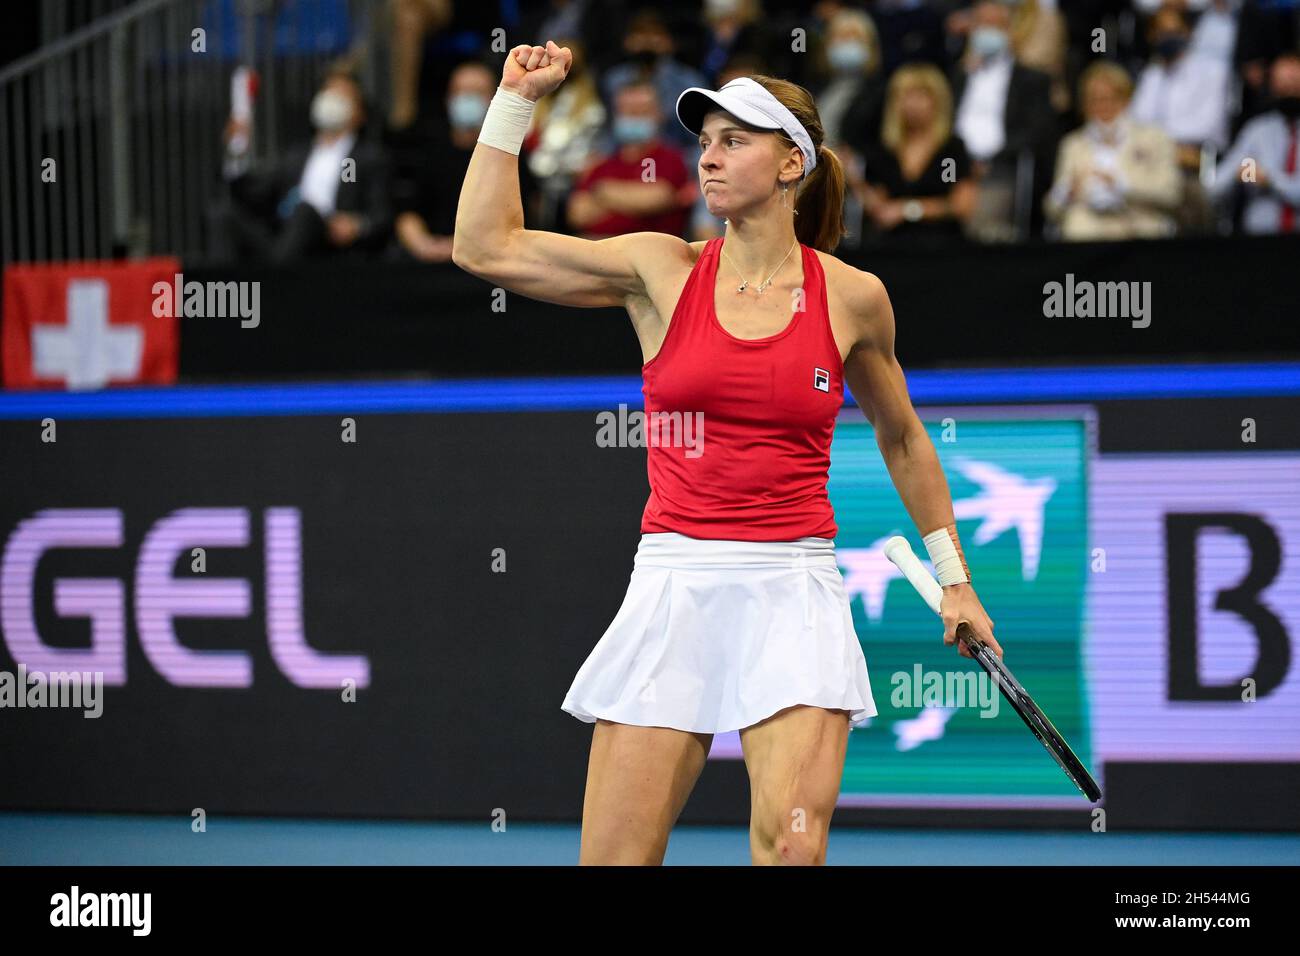 Prague, Czech Republic. 06th Nov, 2021. Liudmila Samsonova of Russia  celebrates a victory after the final match of the women's tennis Billie  Jean King Cup (former Fed Cup) against Belinda Bencic of